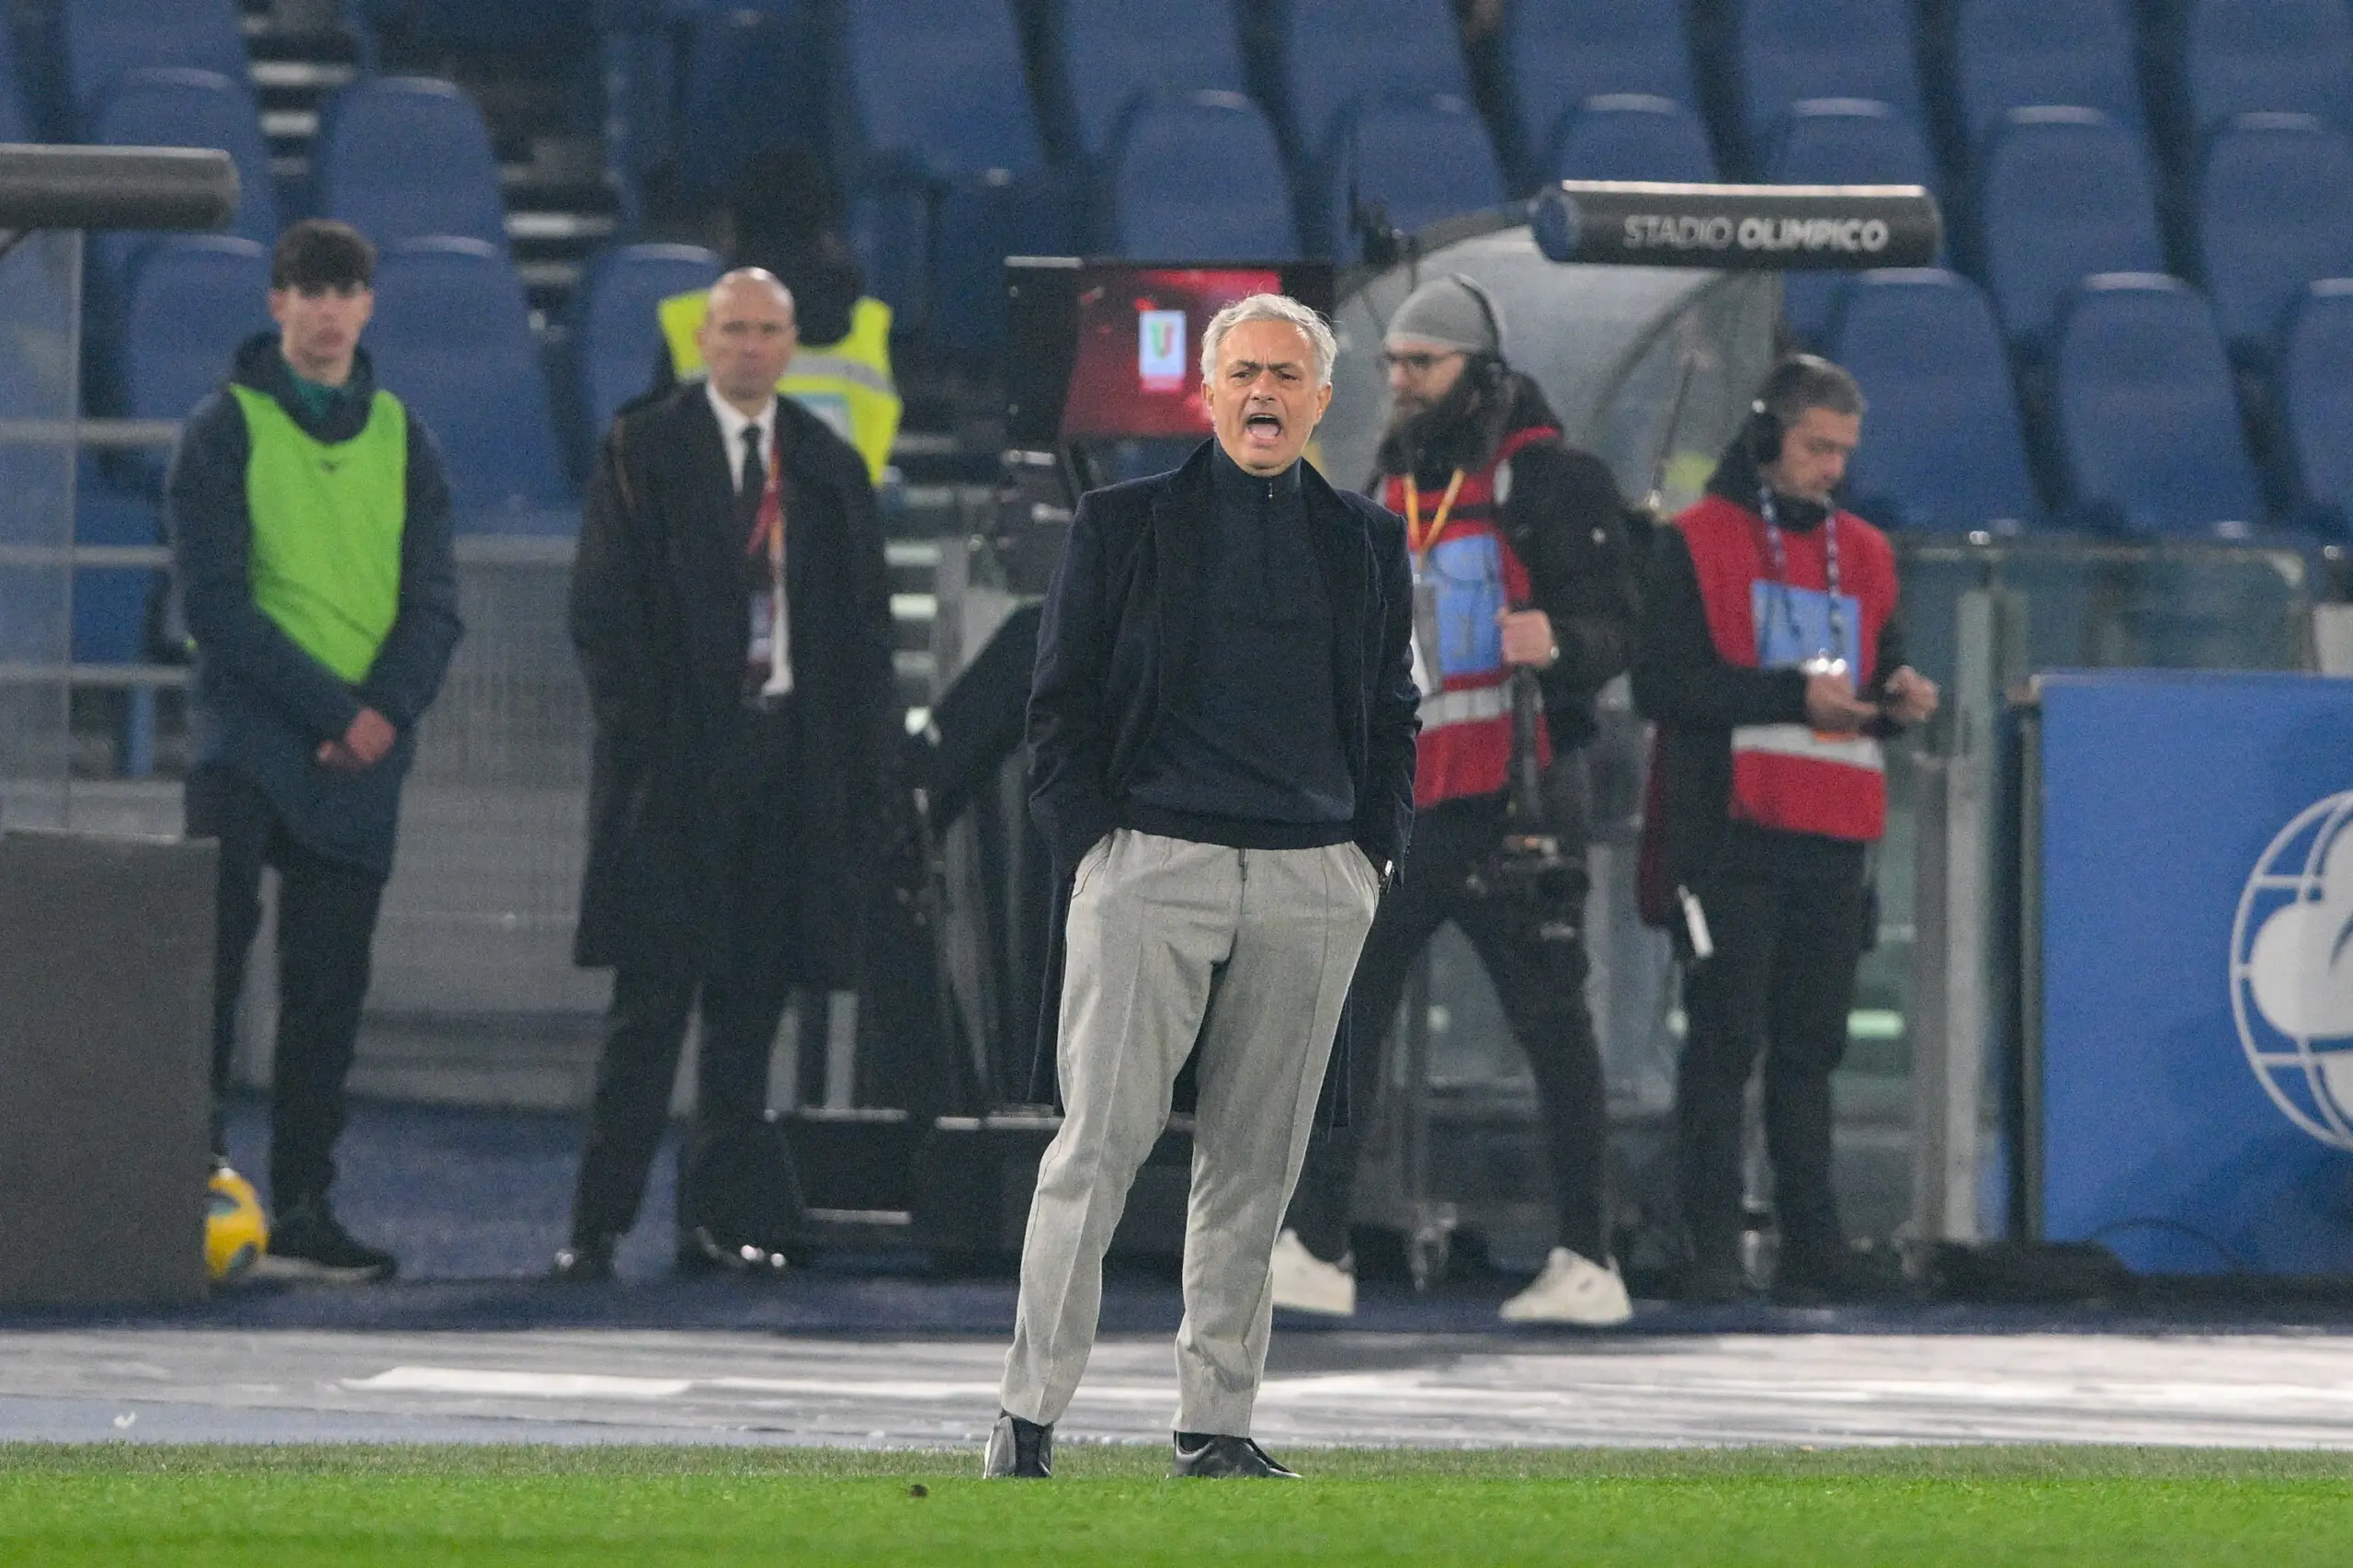 Roma fell to ninth place after the loss to Milan, and José Mourinho is teetering. The brass could make abrupt decisions if they don’t win against Verona.